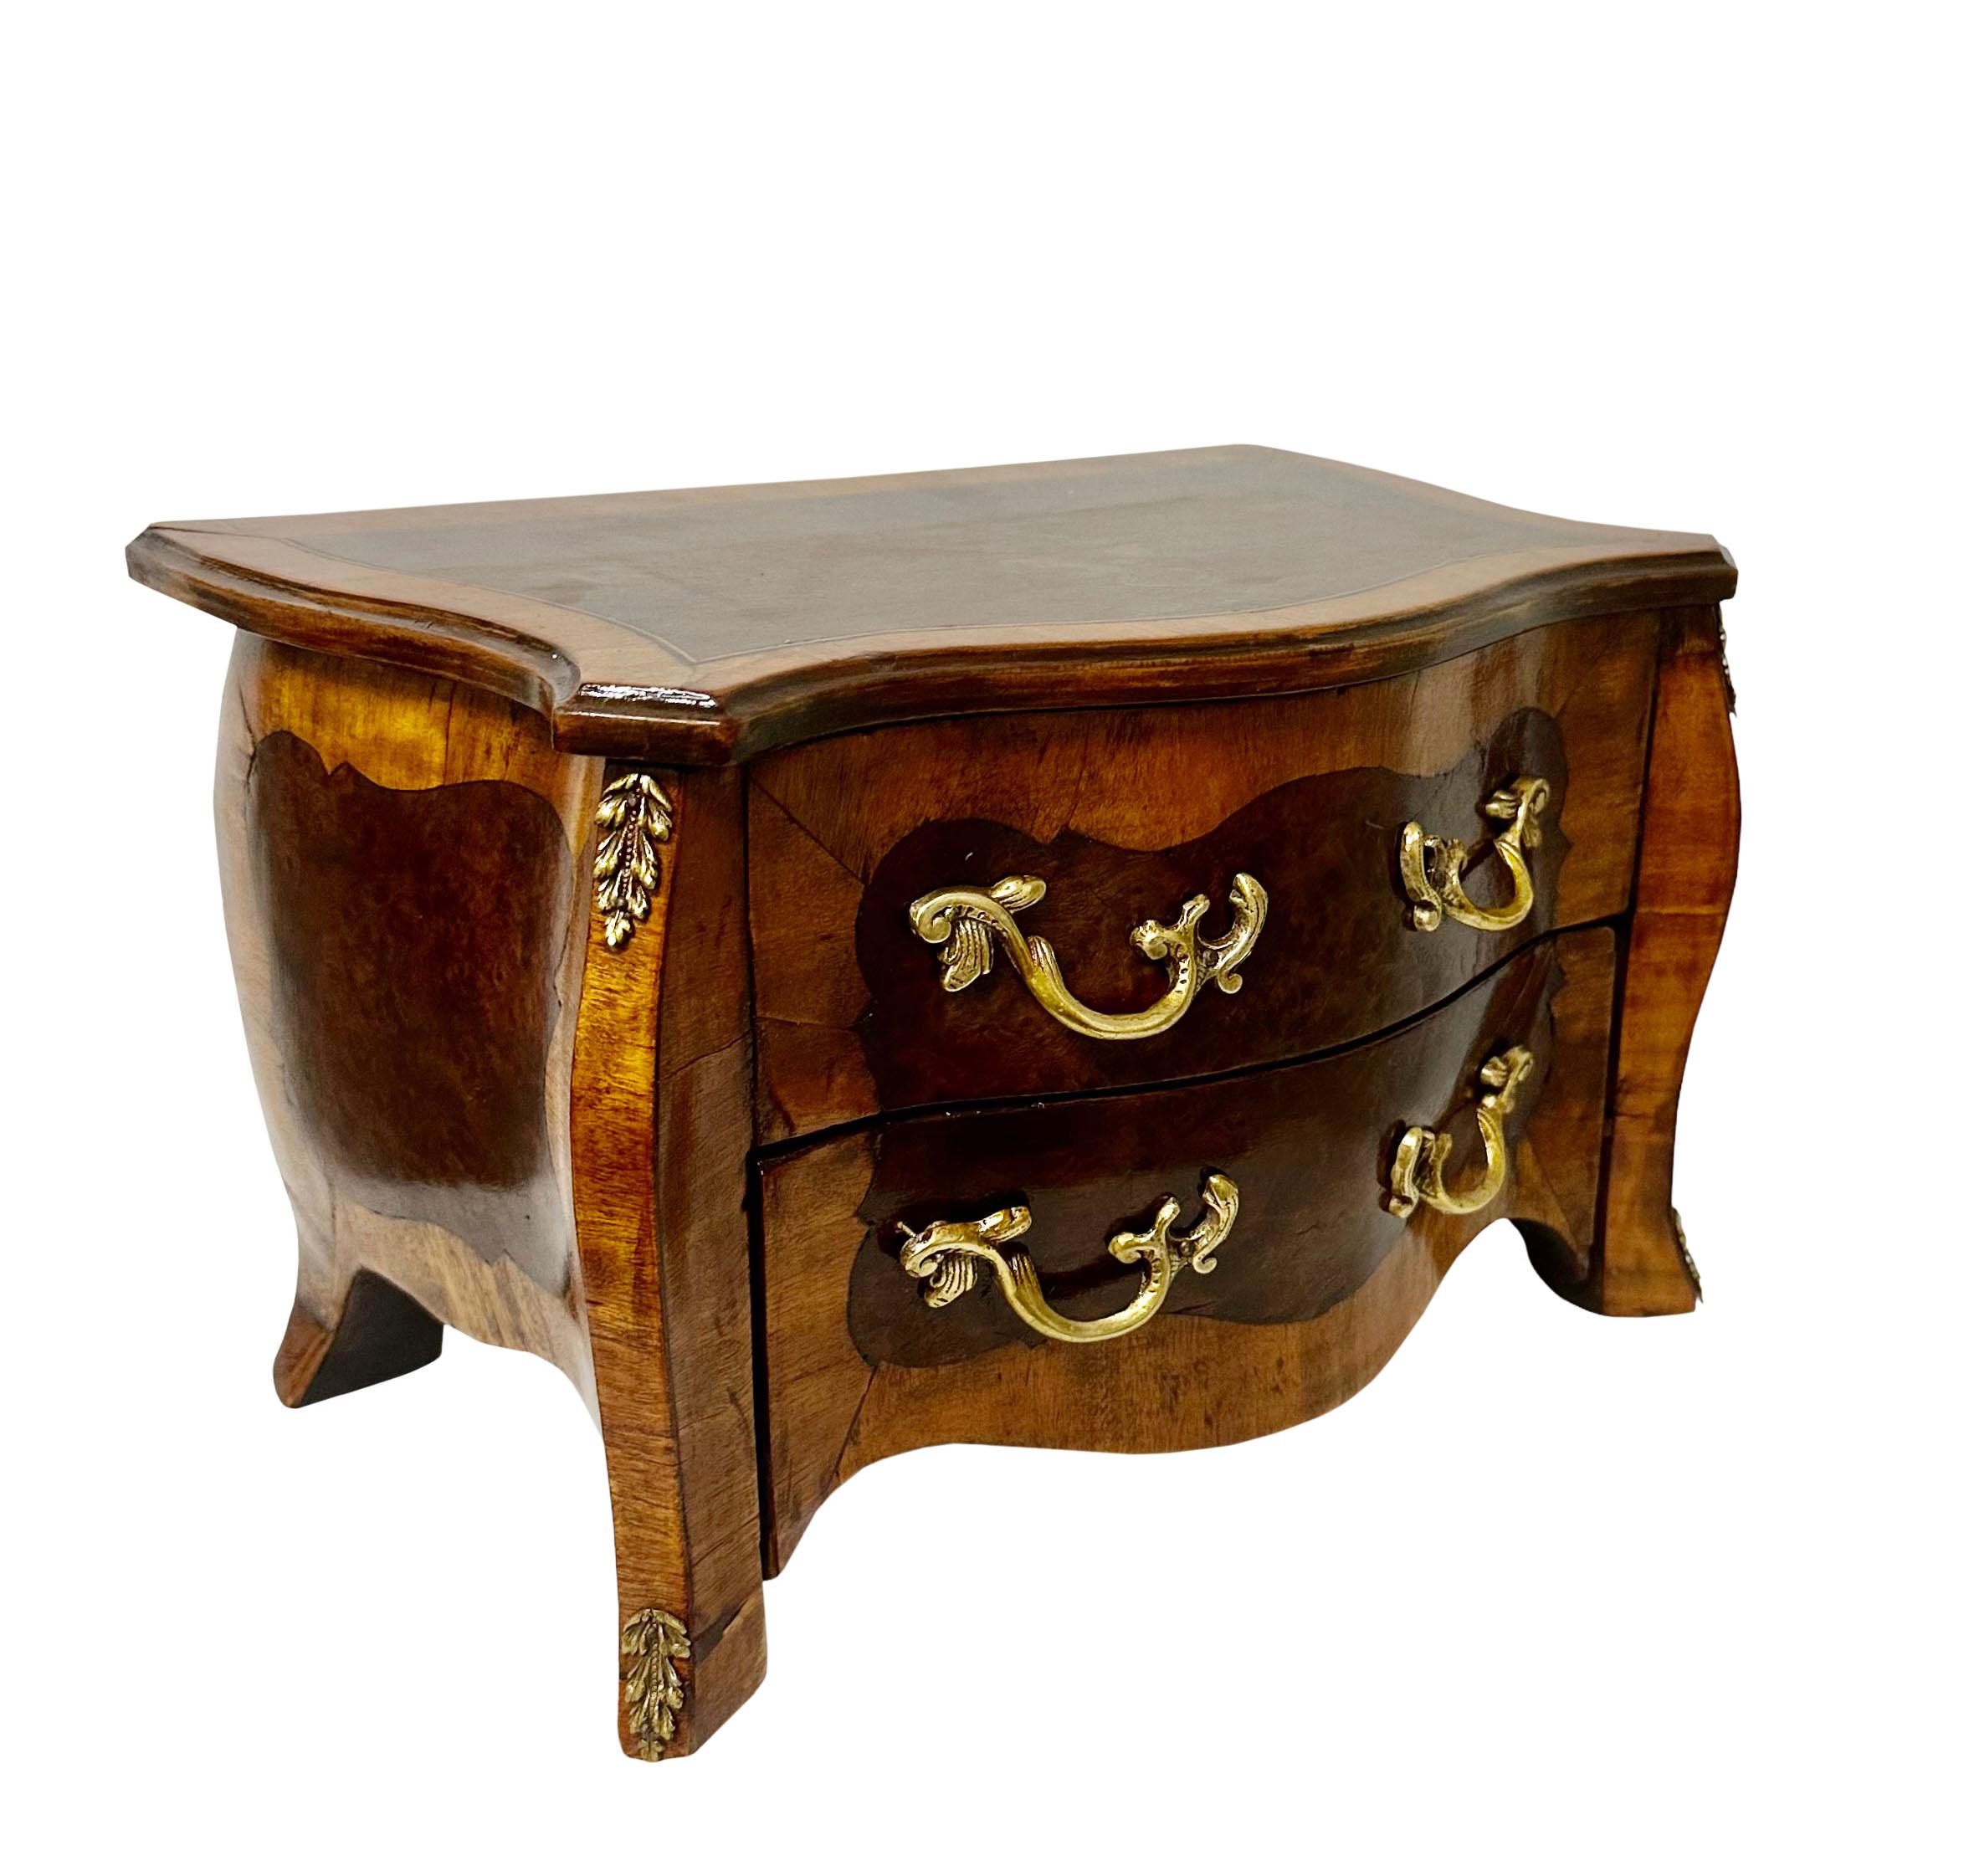 1800s French inlaid diminutive commode. It is a salesman sample converted into a jewelry box with the two deep compartments and back lined in velvet. The interior could have been made to use as a tea caddy as well. The first drawer does not work of